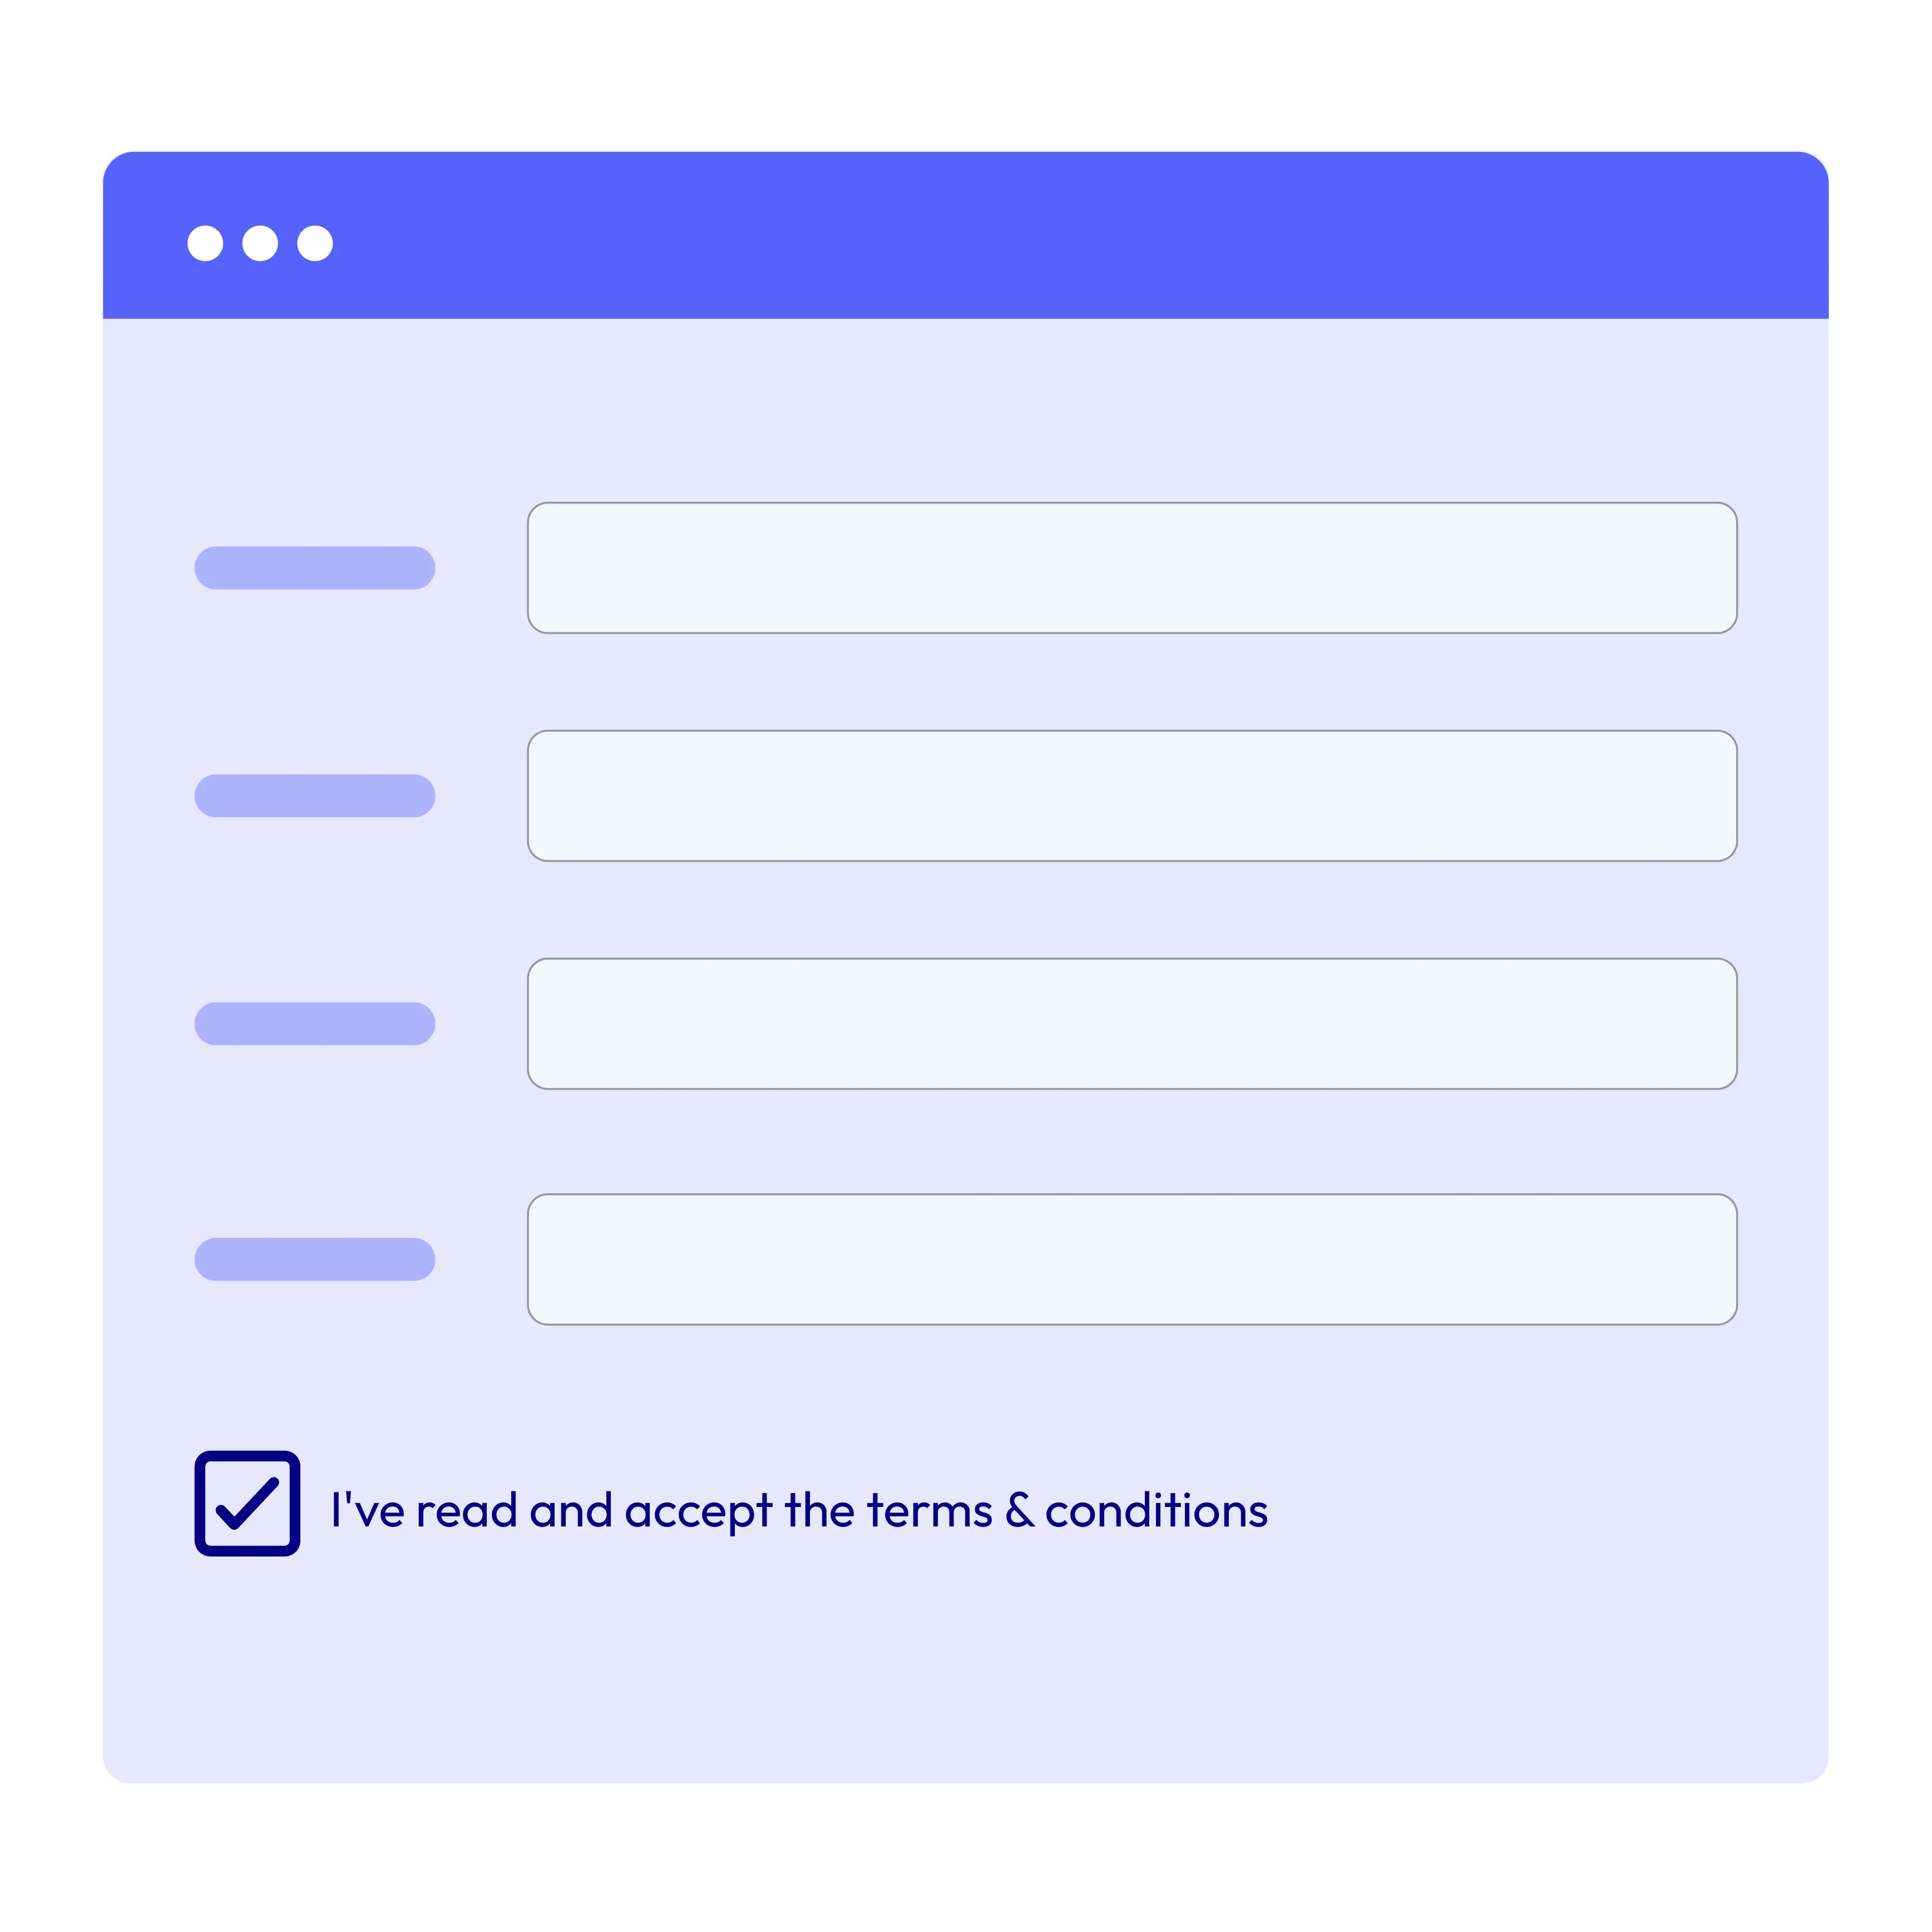 Add terms & conditions checkbox